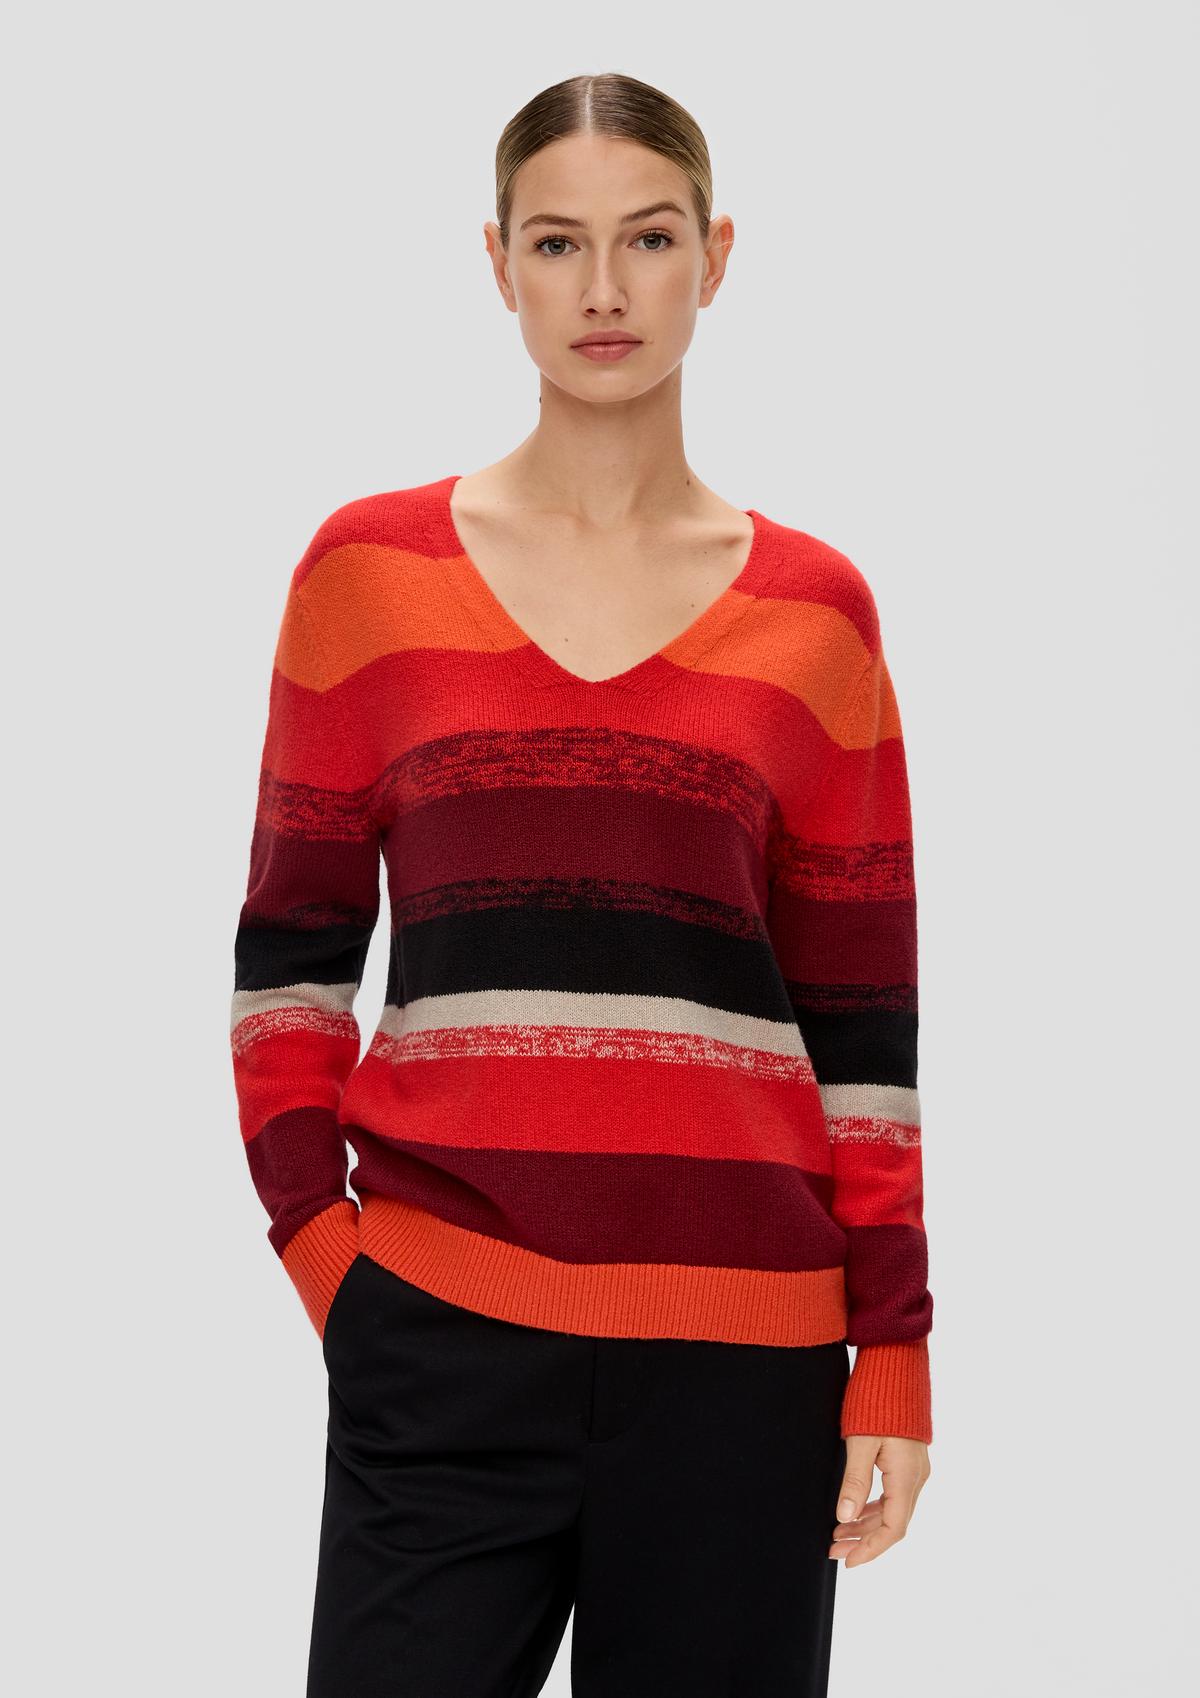 Knit jumper with gradient stripes